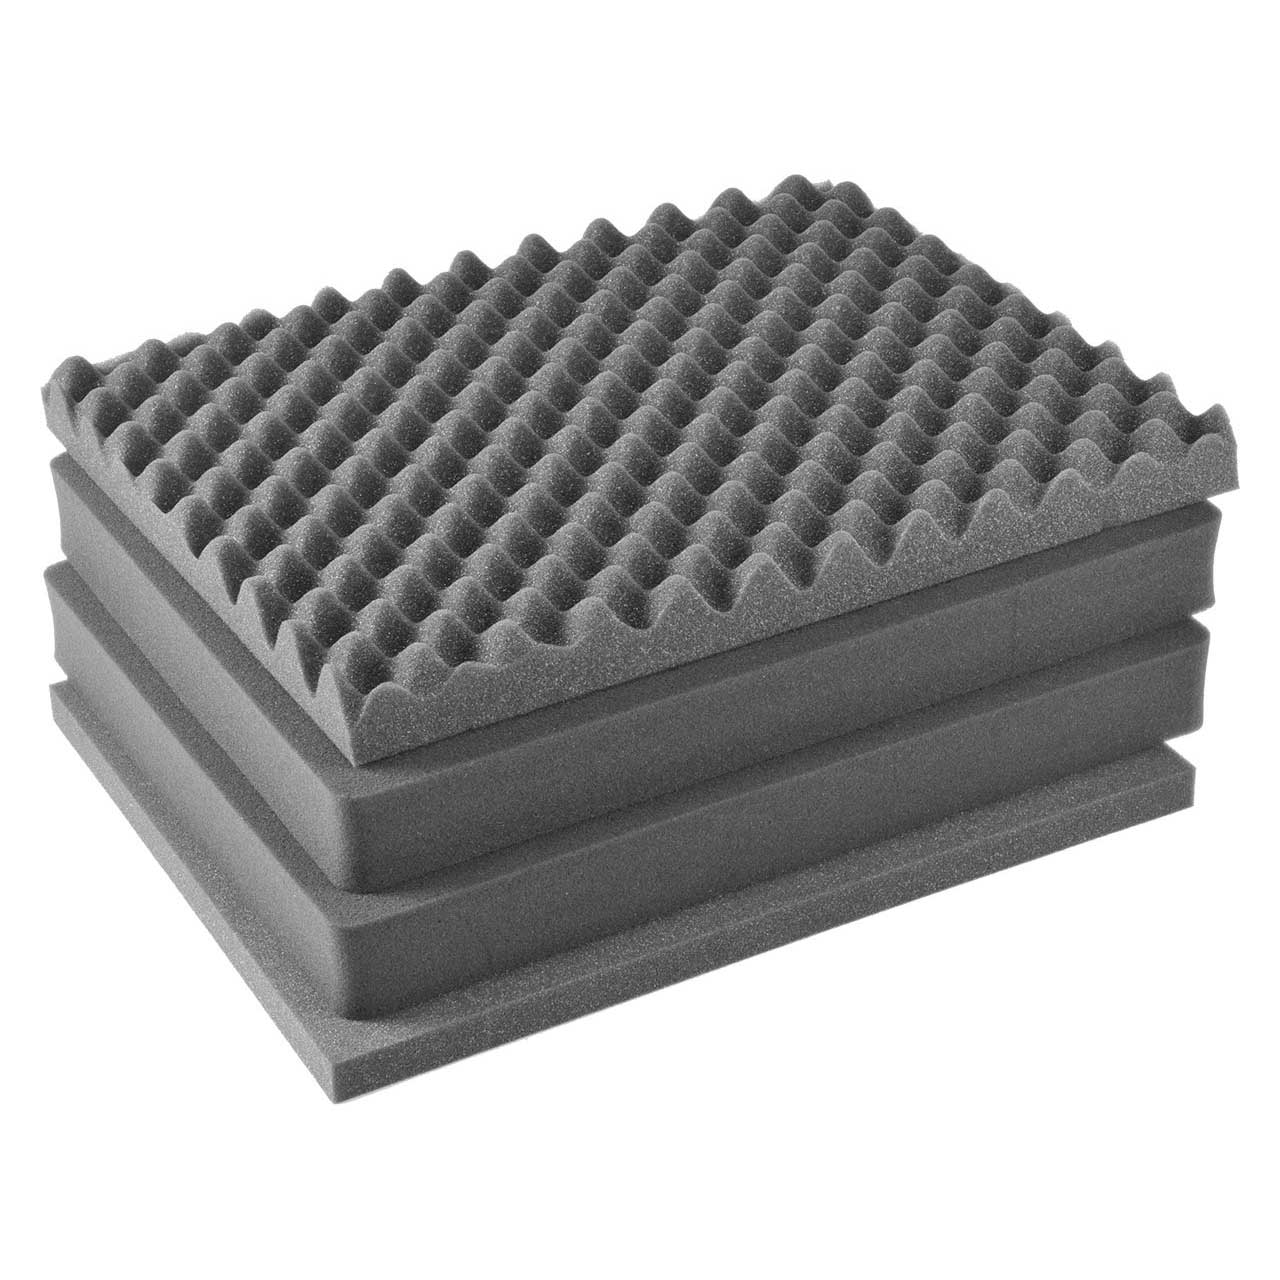 Pelican 1601 4-Piece Replacement Foam Set for 1600 Protector